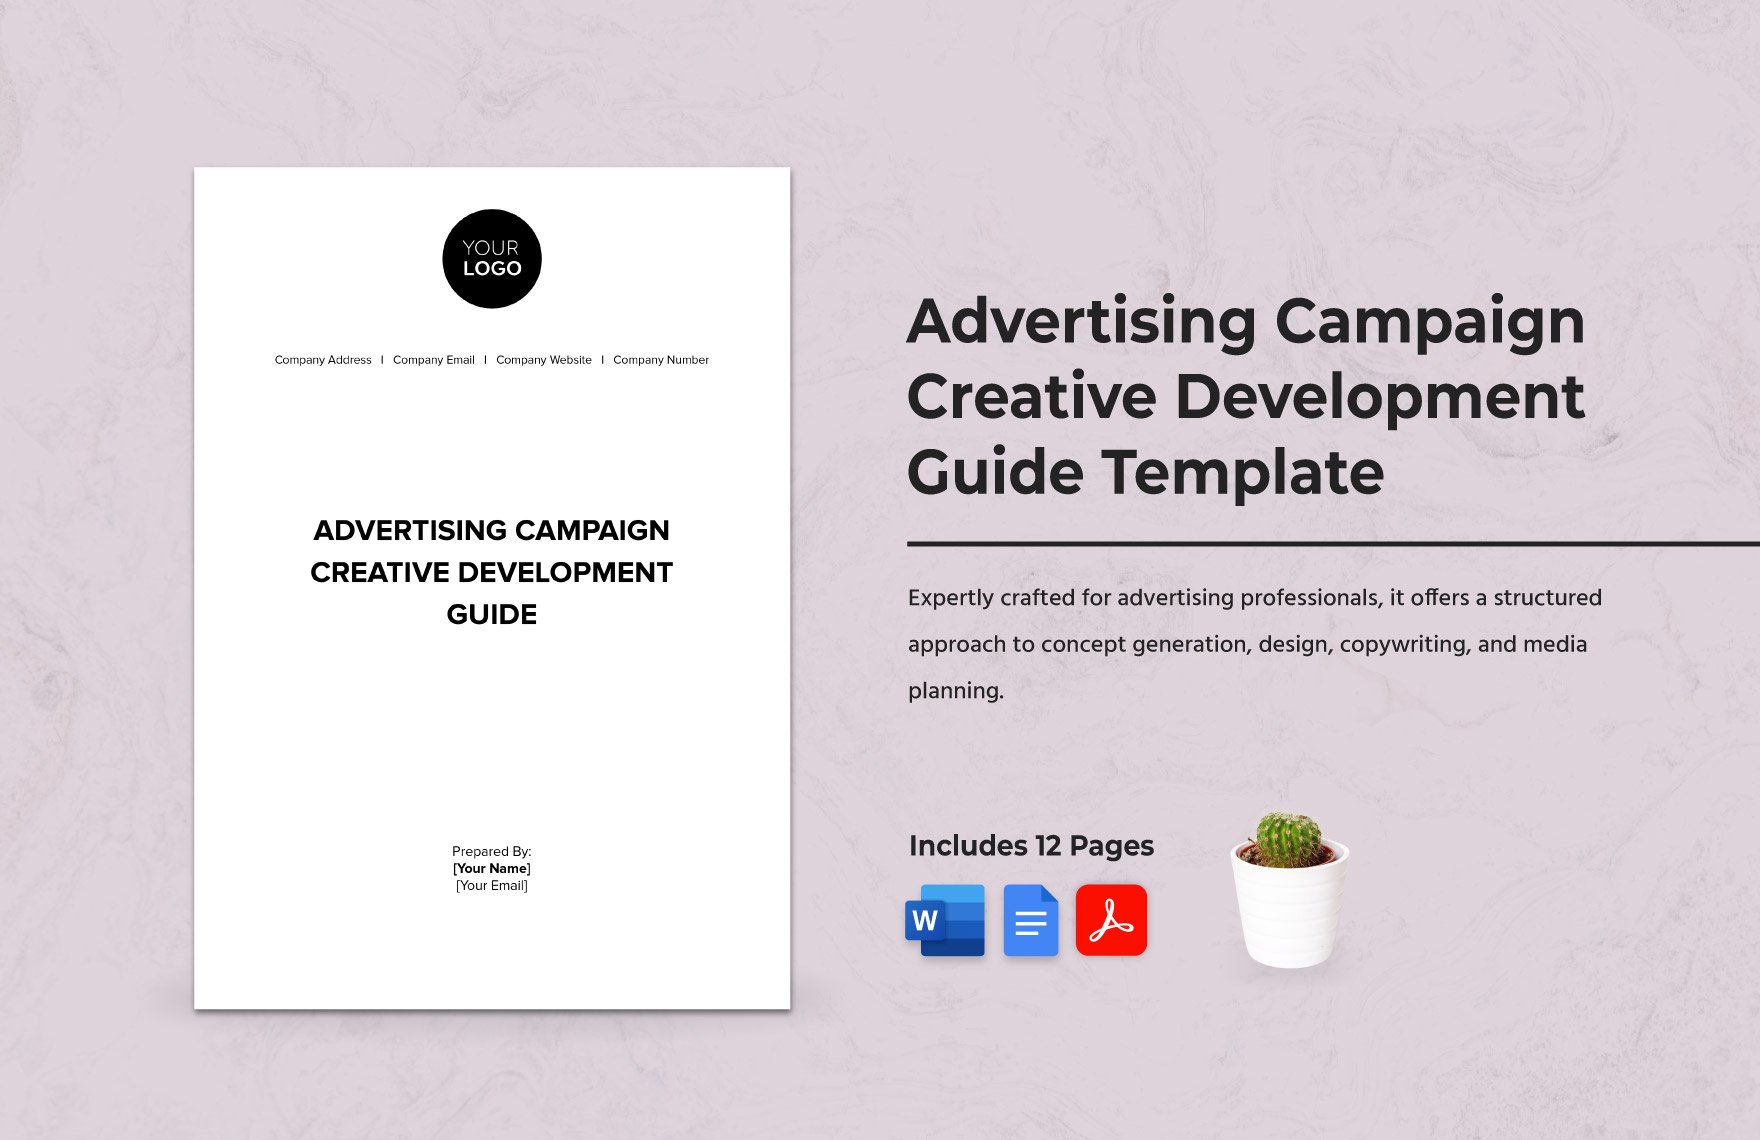 Advertising Campaign Creative Development Guide Template in Word, Google Docs, PDF